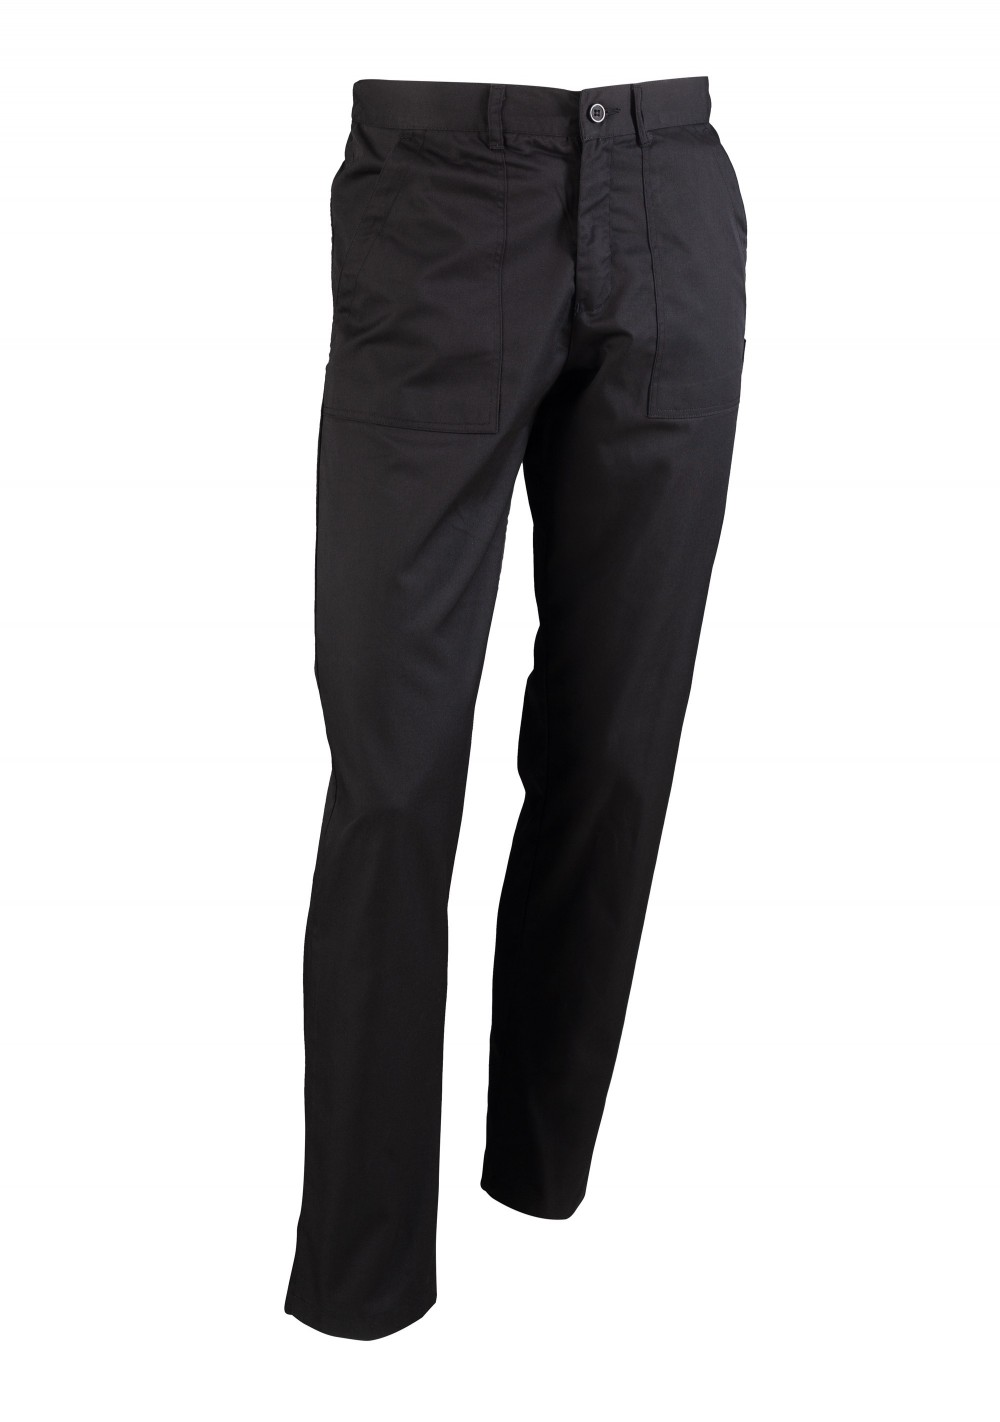 Chef Works BBLWBLK Black Lightweight Baggy Chef Pants